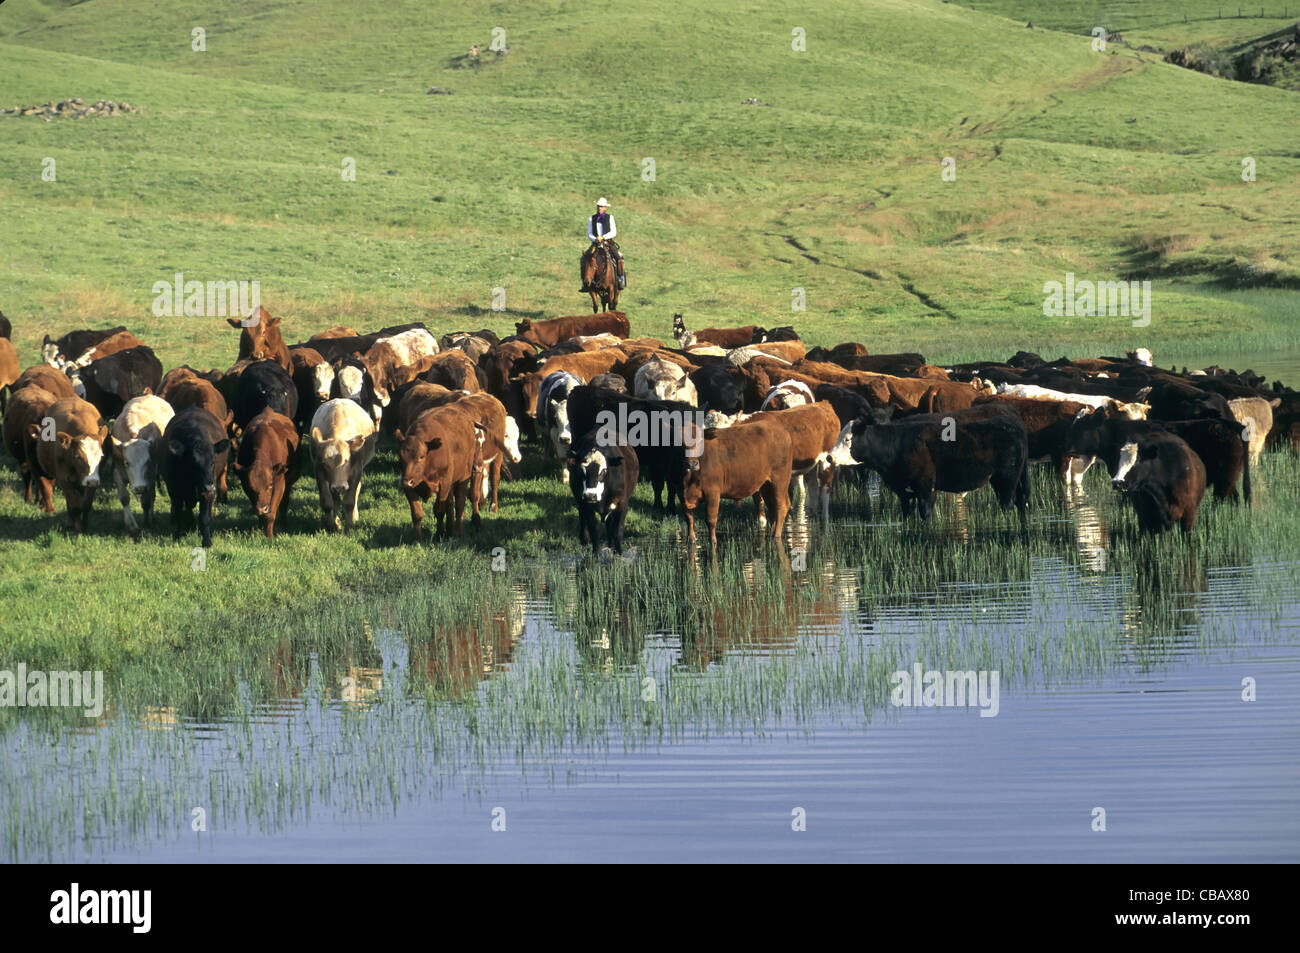 Cattle drive, drover directing stock. Stock Photo